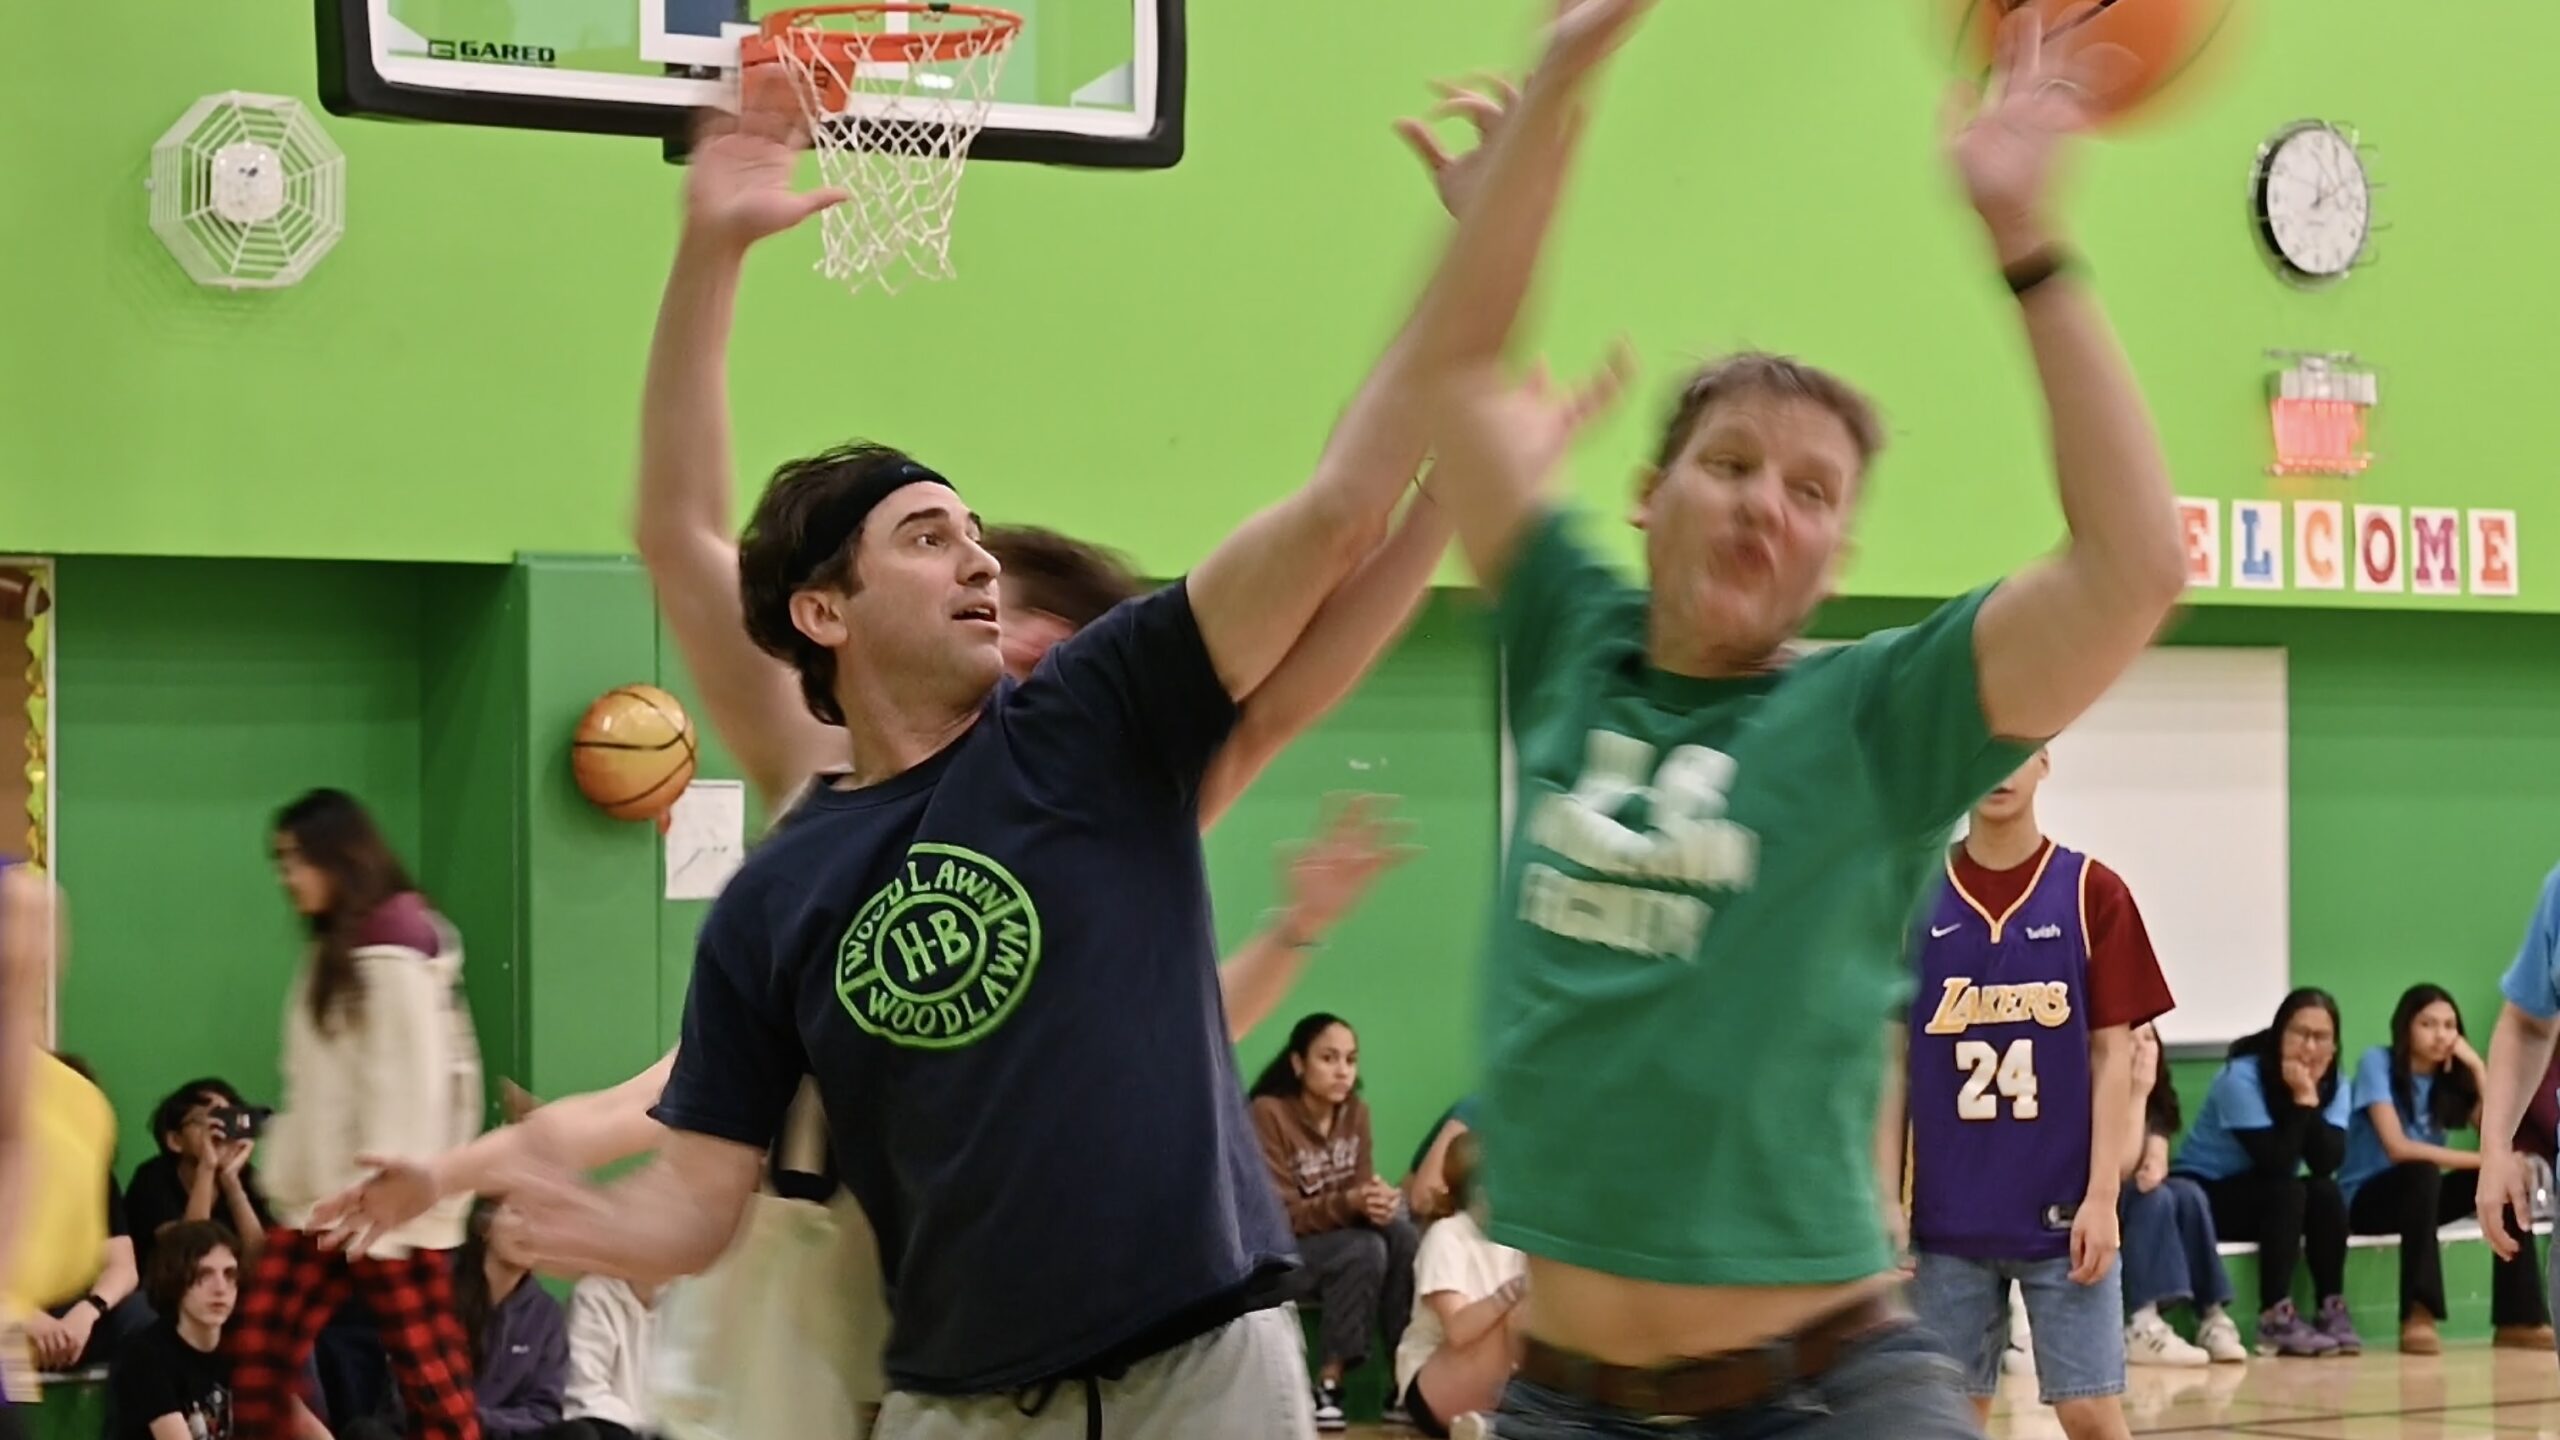 Students and teachers playing a basketball game